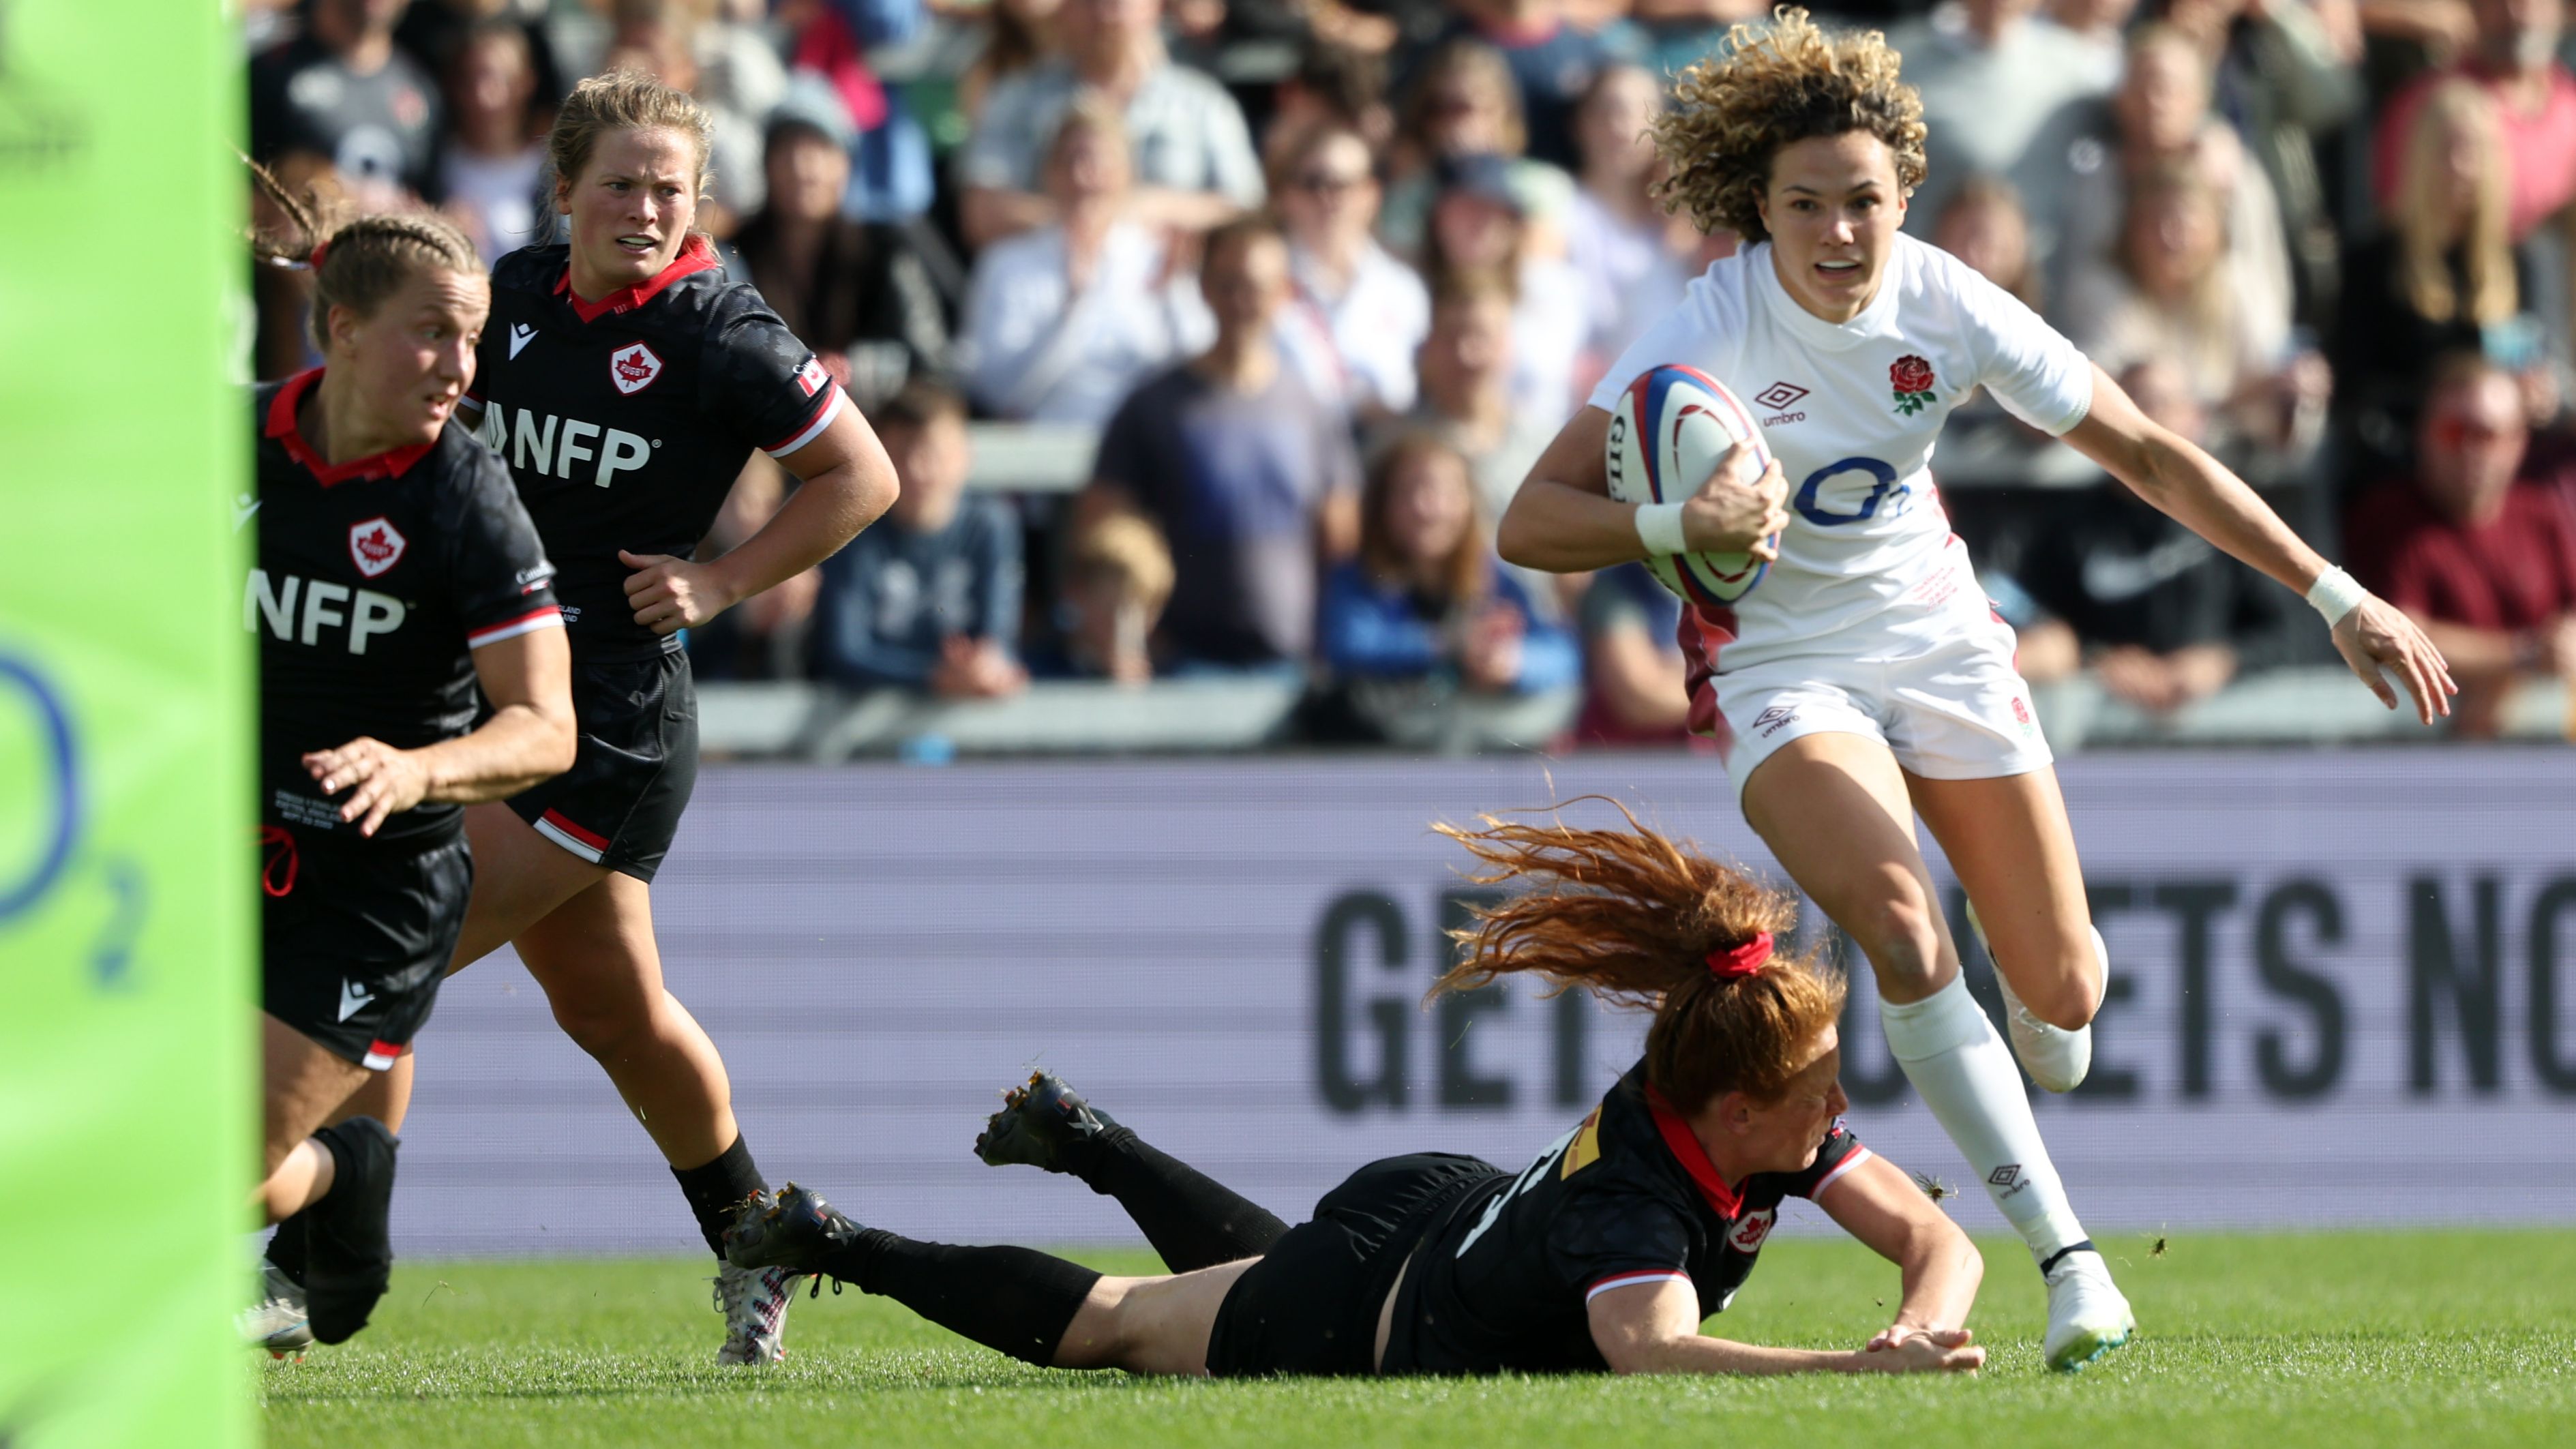 Womens Rugby Union LIVE England v Canada - live text updates and latest score - Live